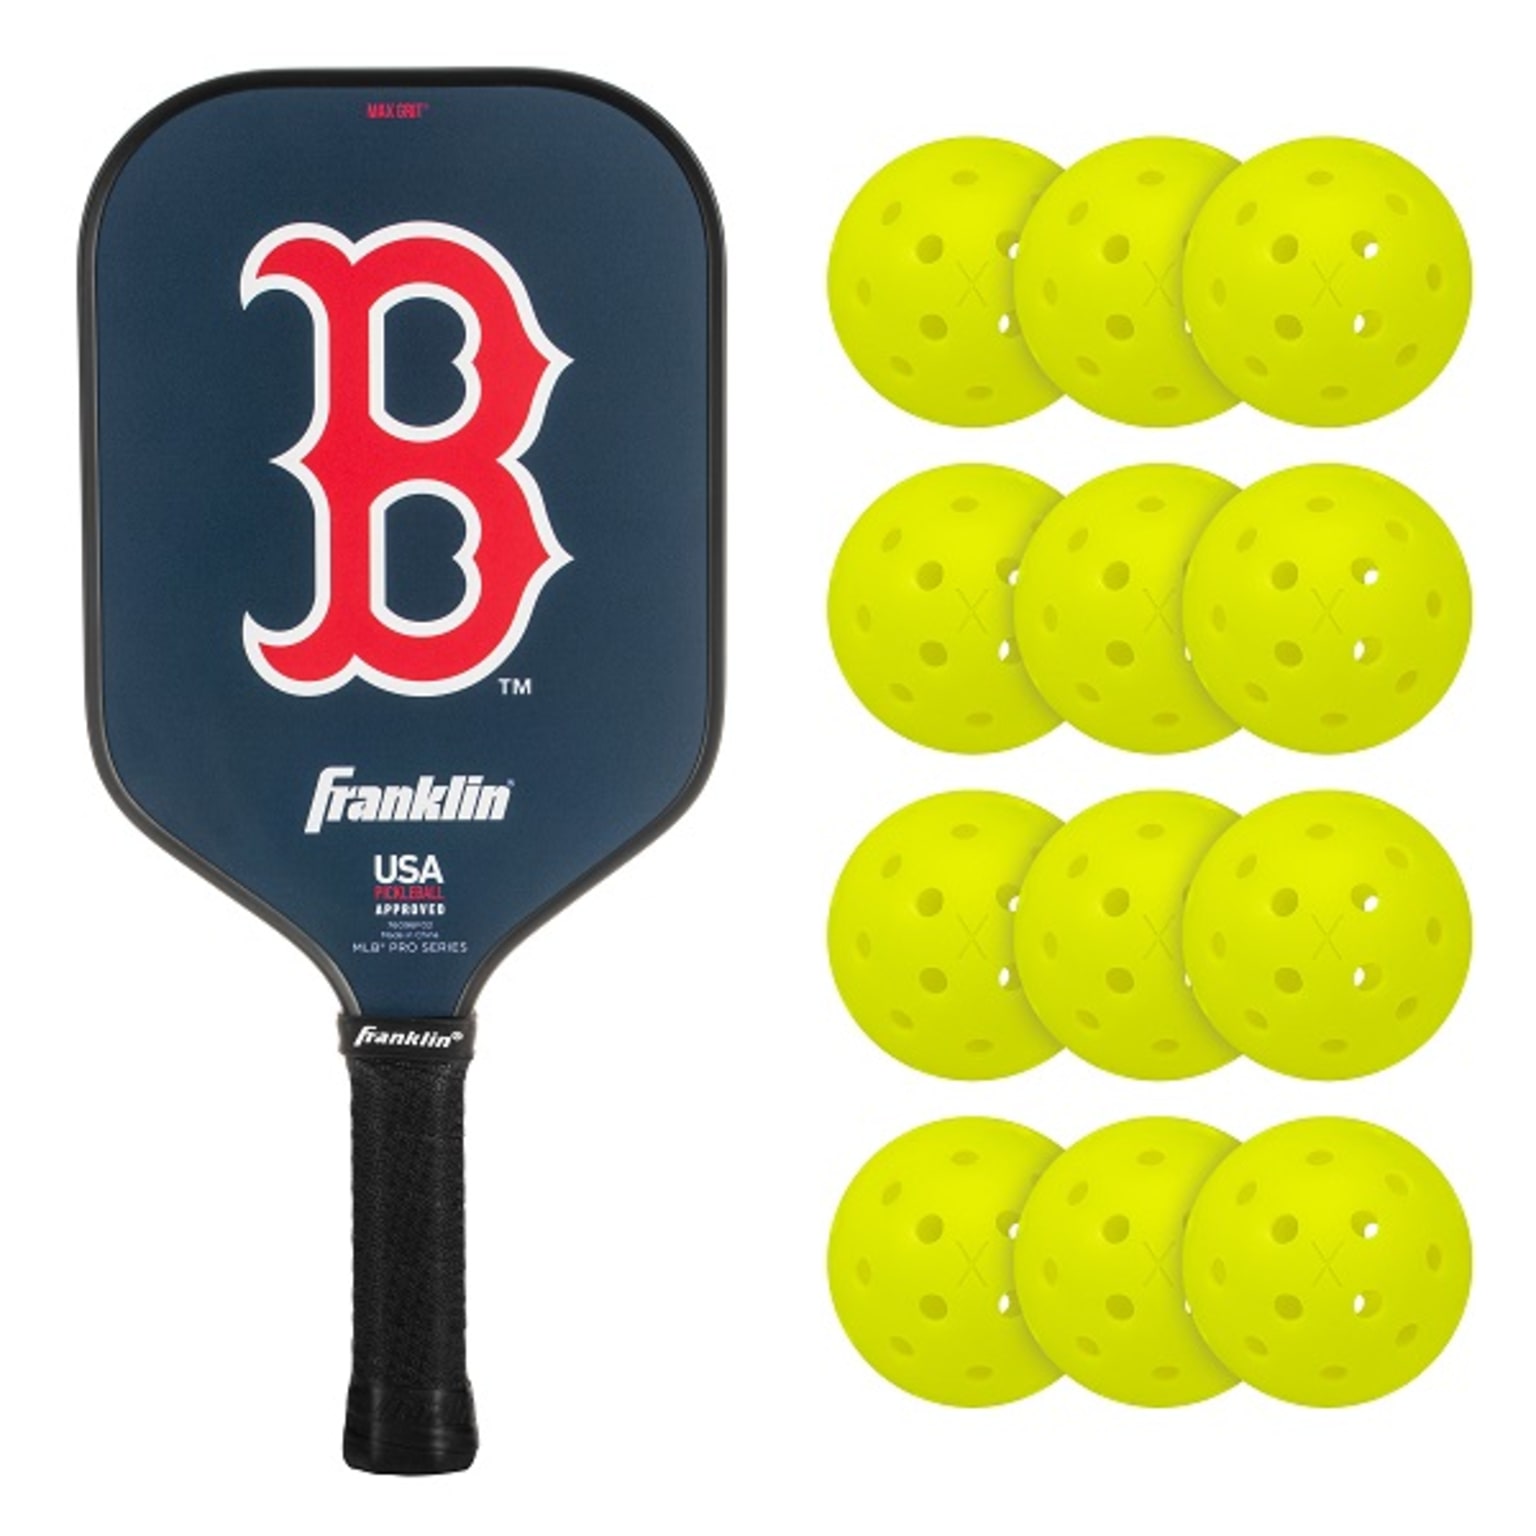 Fenway Park to host pickleball event this summer - The Boston Globe